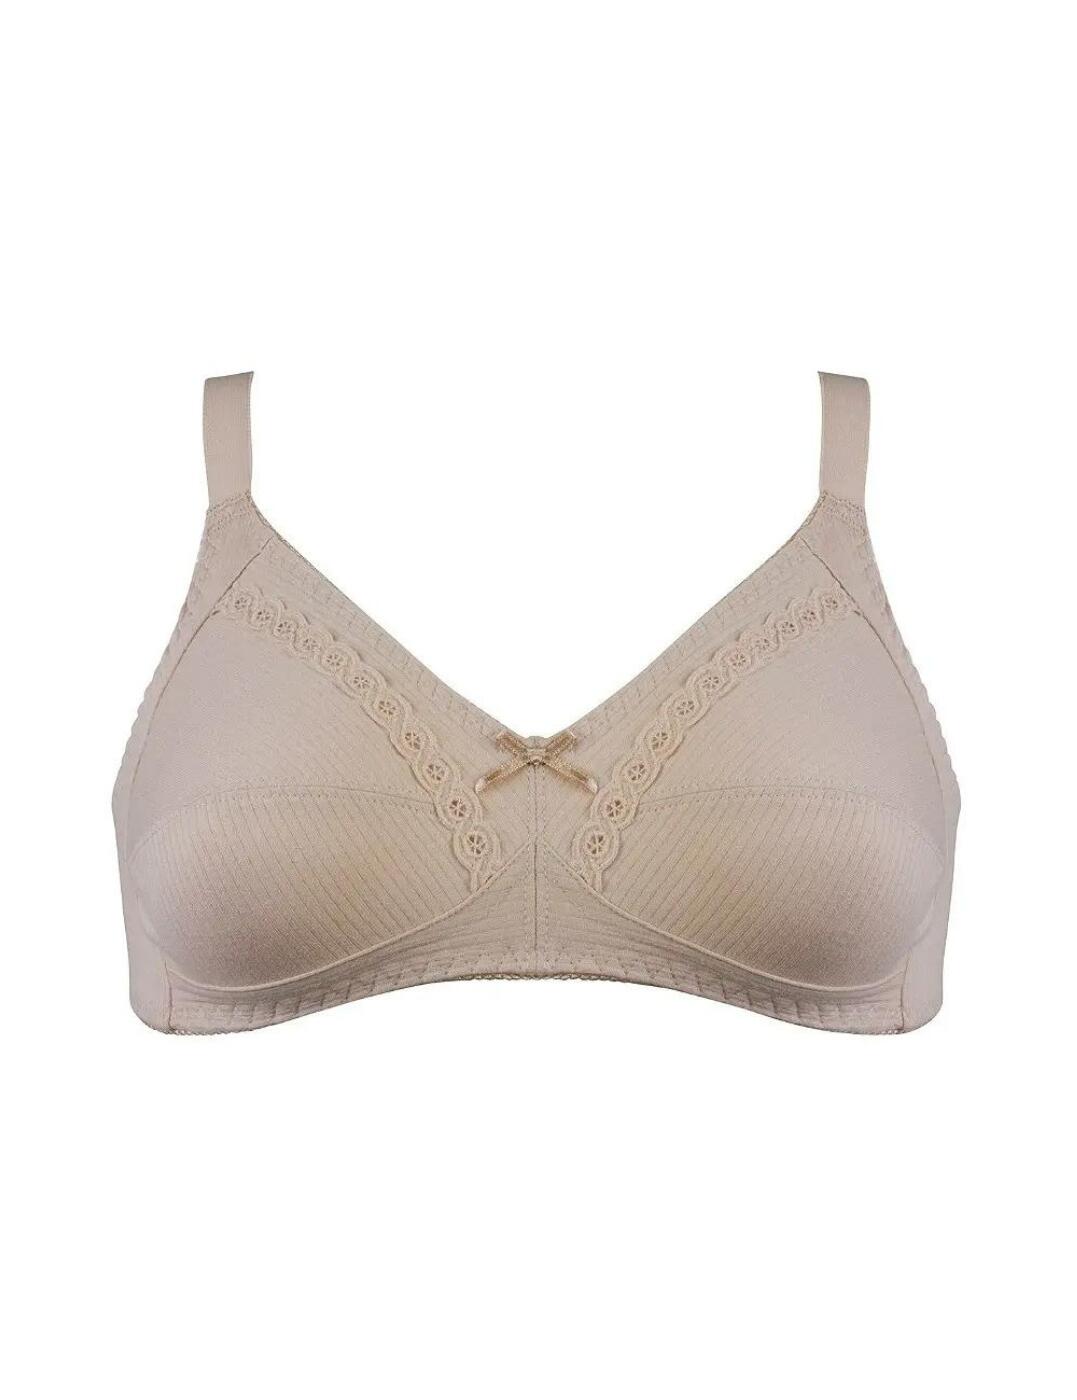 Naturana 100% Cotton Bra Soft Cup Wireless Non Padded Everyday